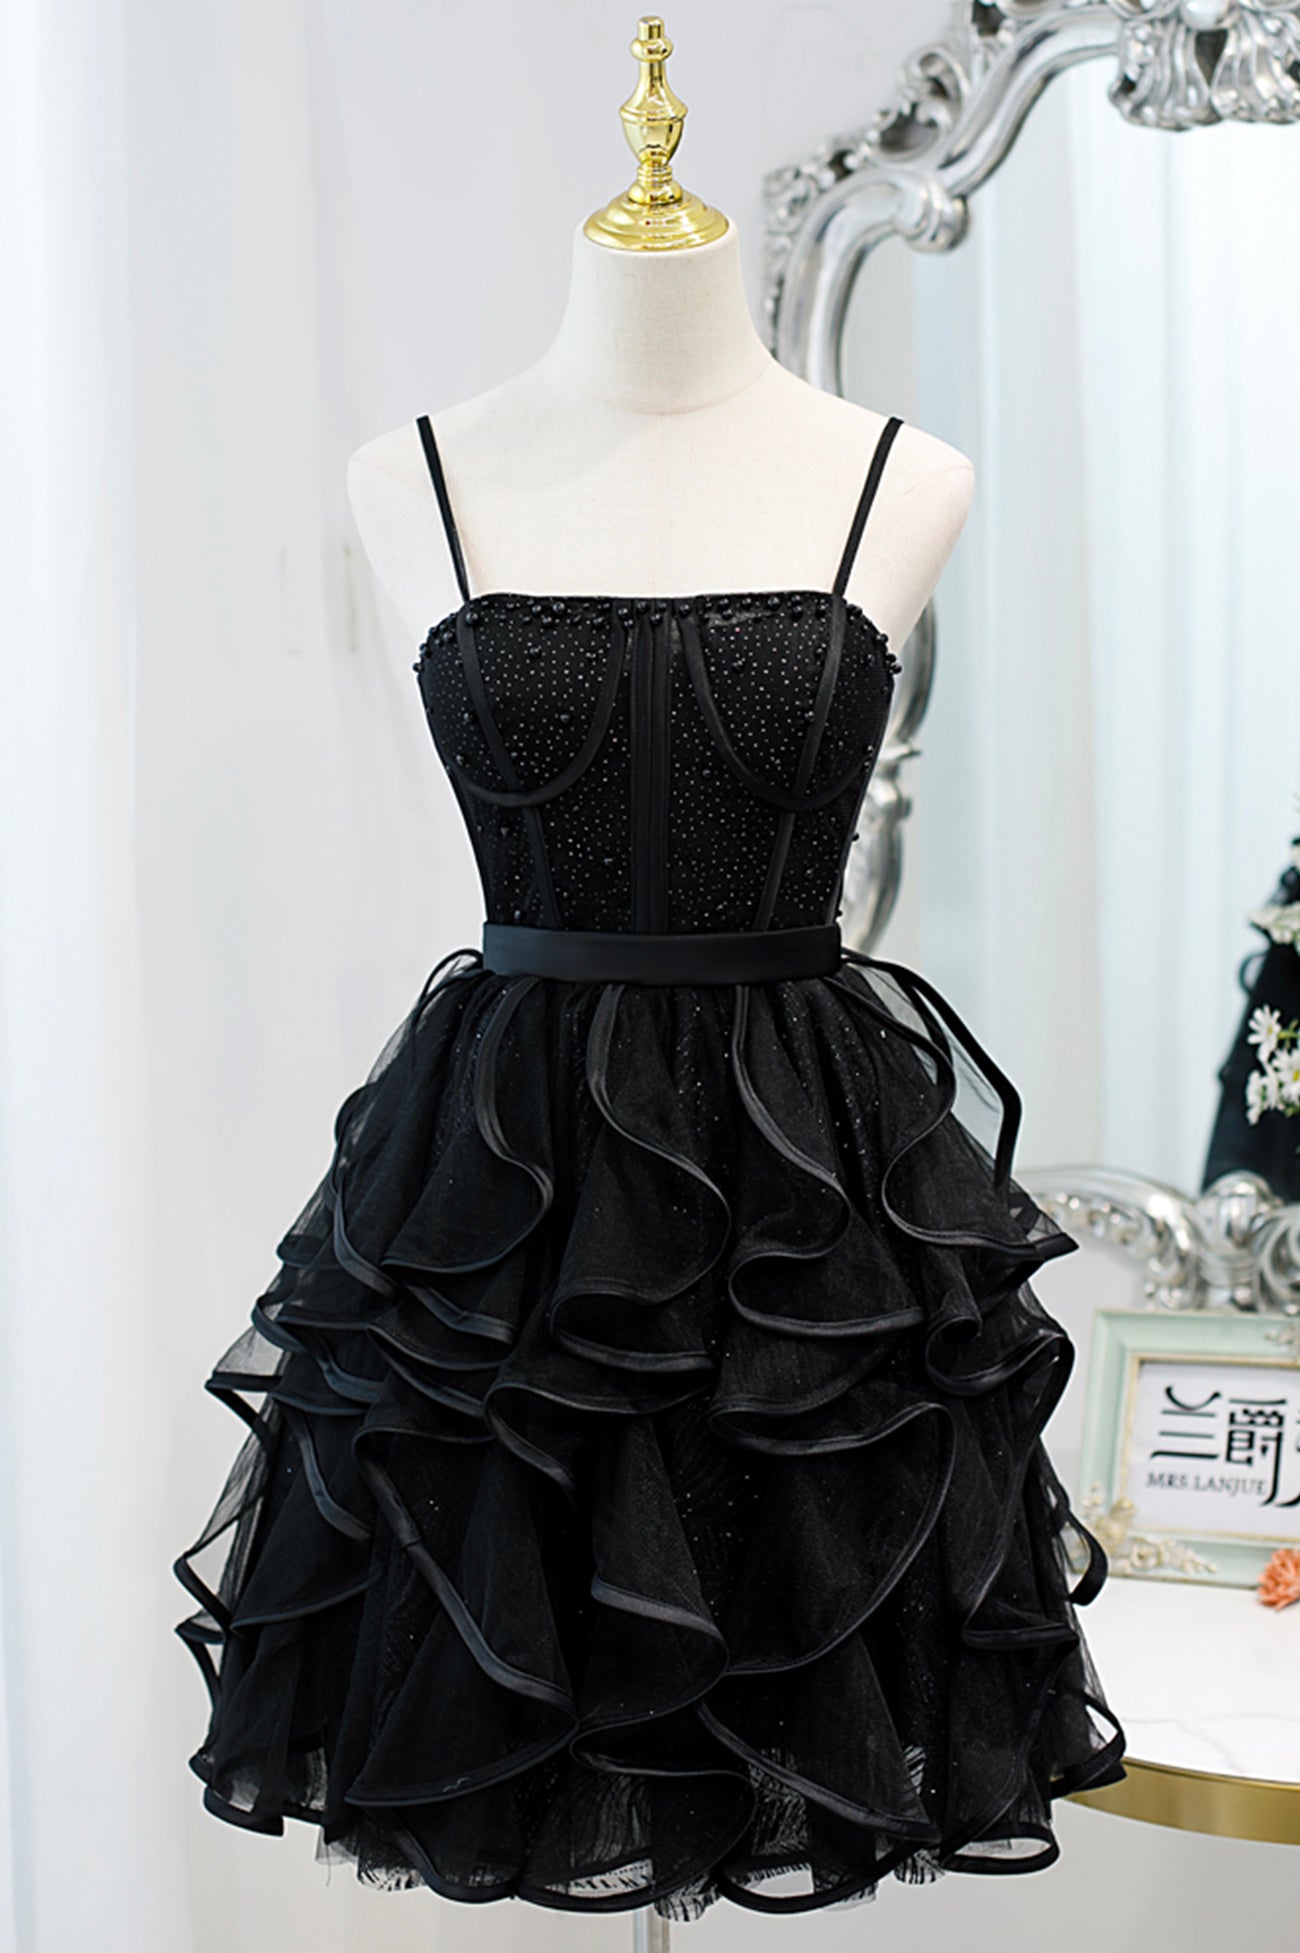 Lovely Spaghetti Strap Tulle Short Prom Dress, A-Line Homecoming Dress